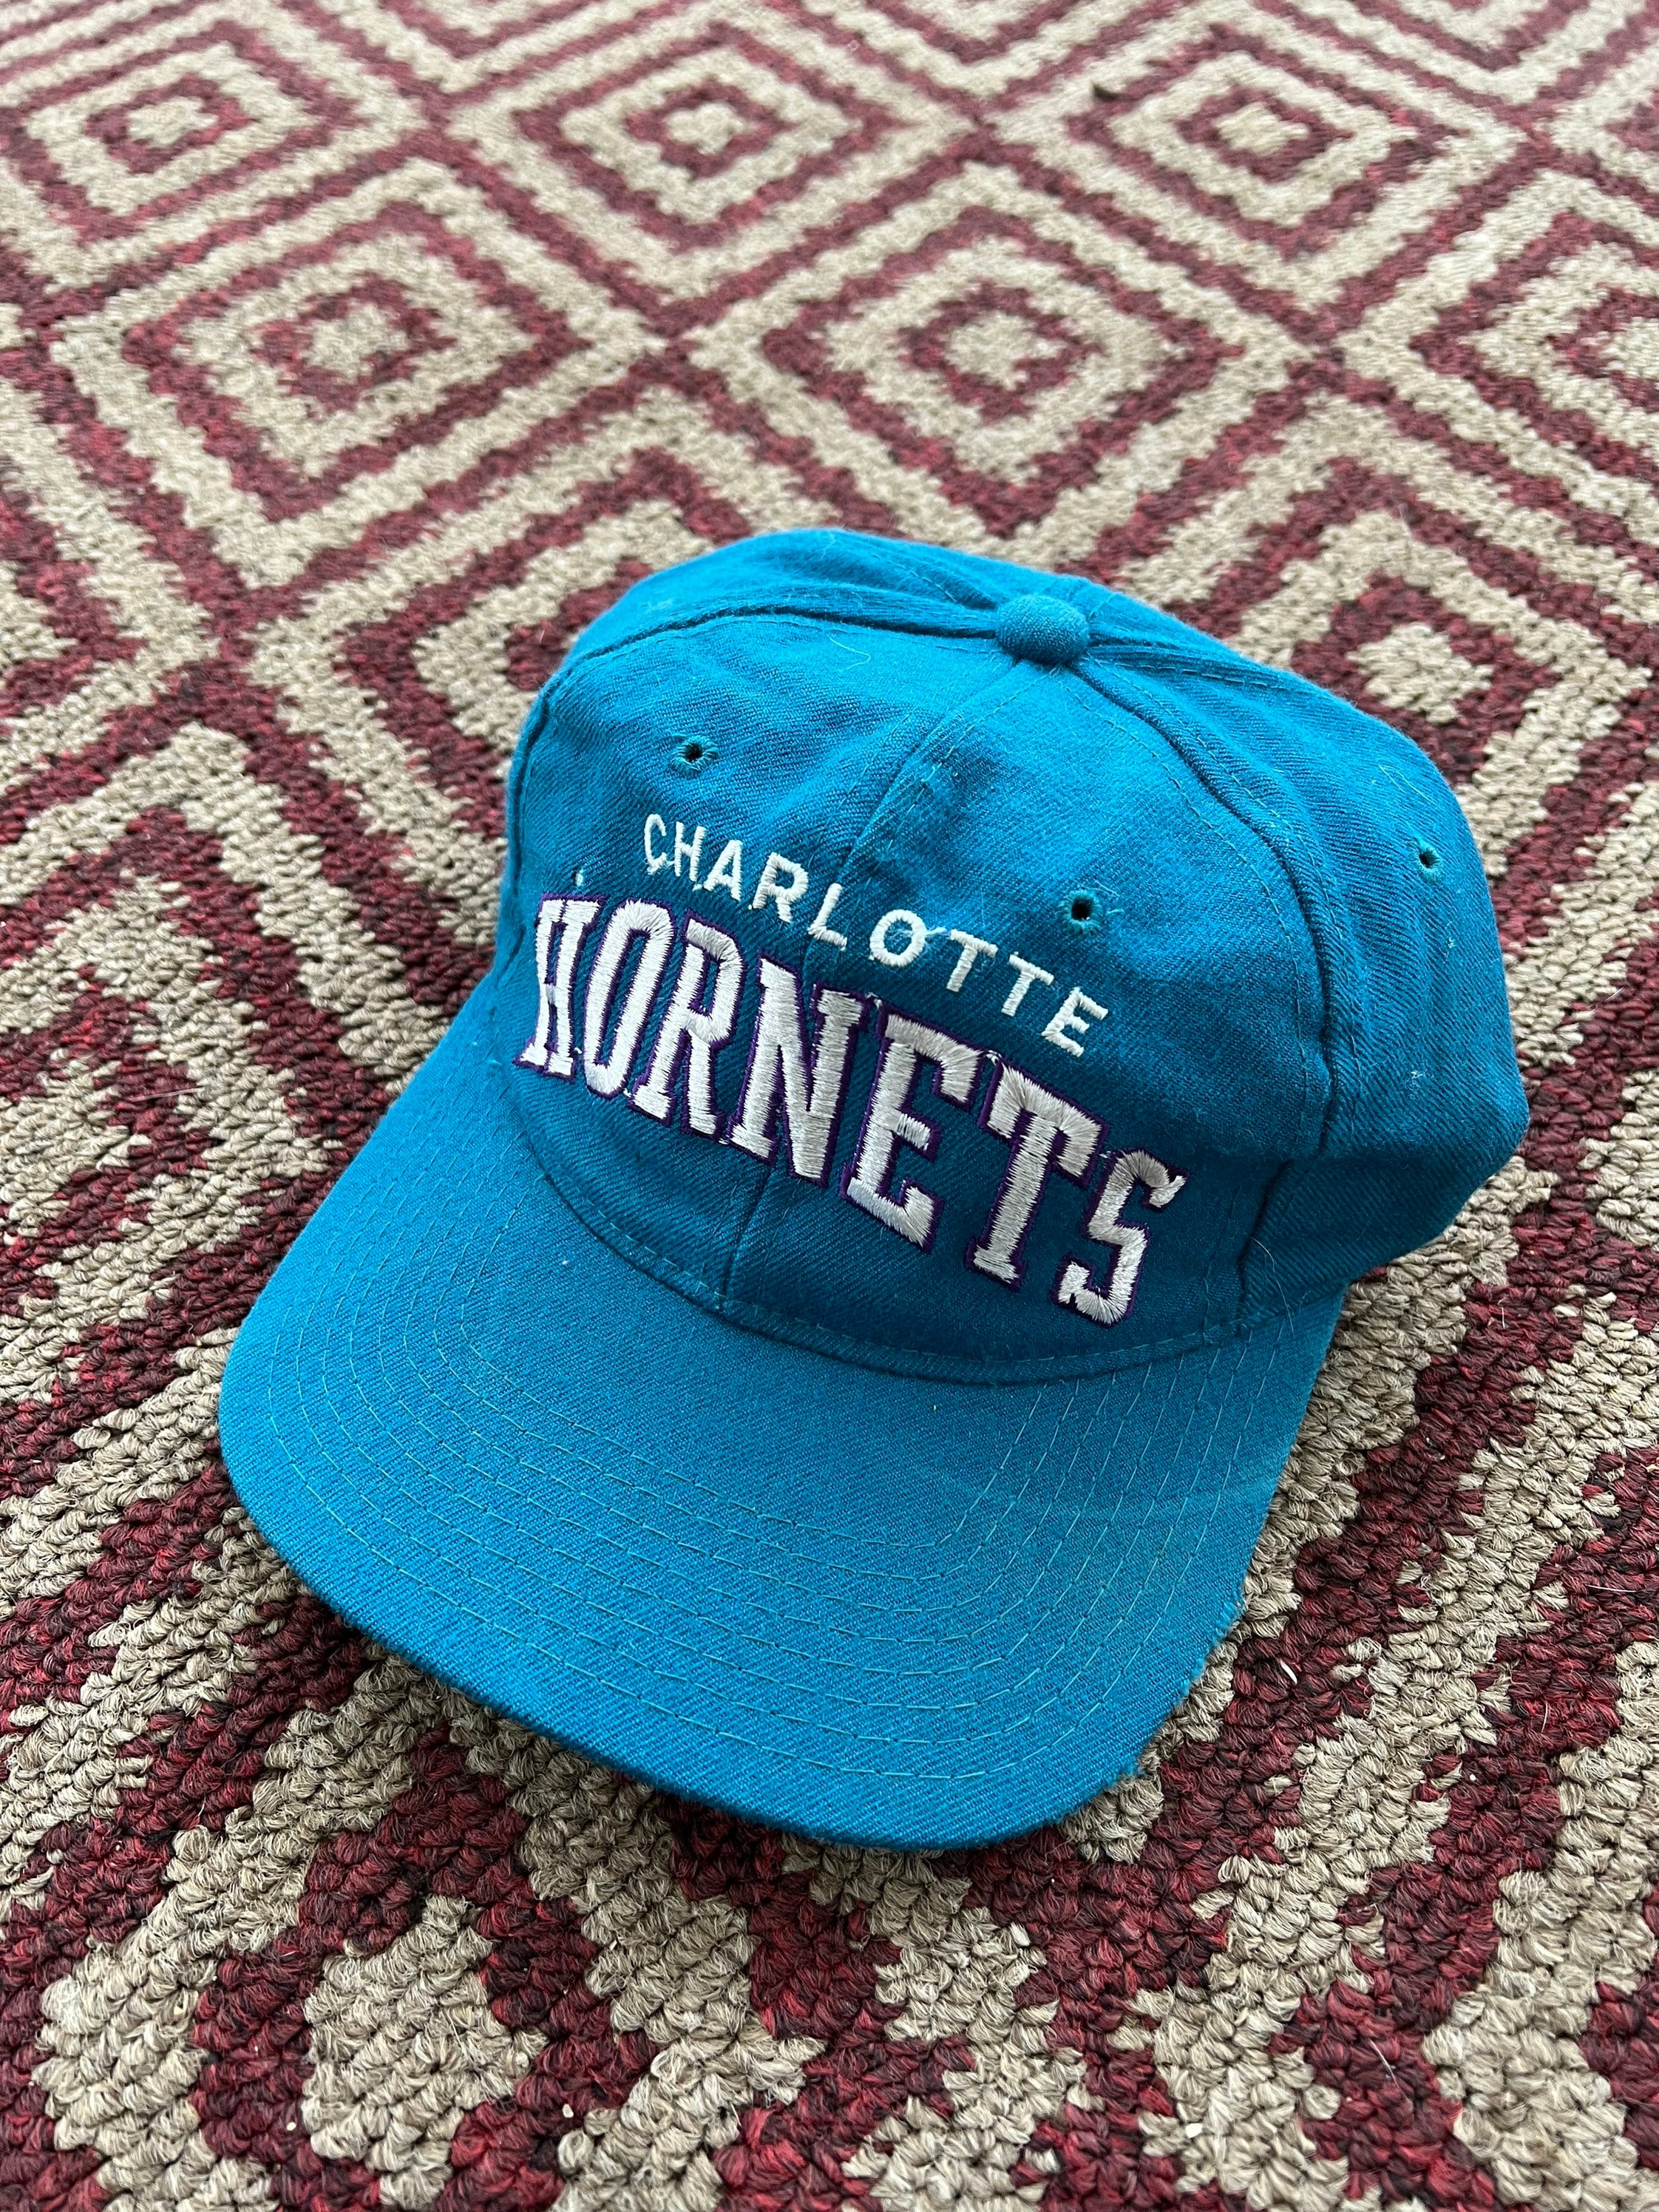 Thought you guys would like my dad's vintage hornets hat : r